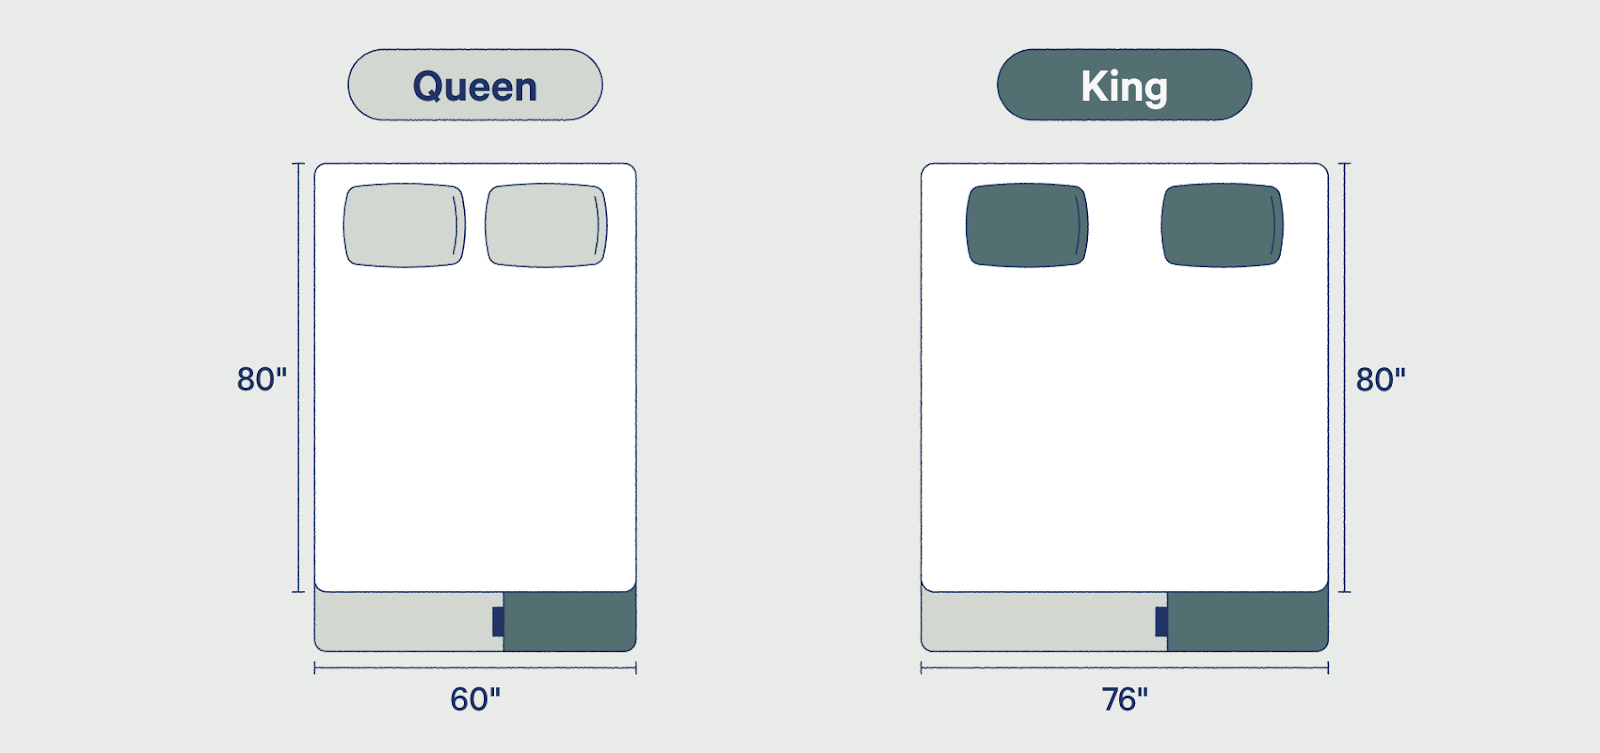 King Vs Queen Bed Size And Comparison, Bed Size Full Vs Queen King